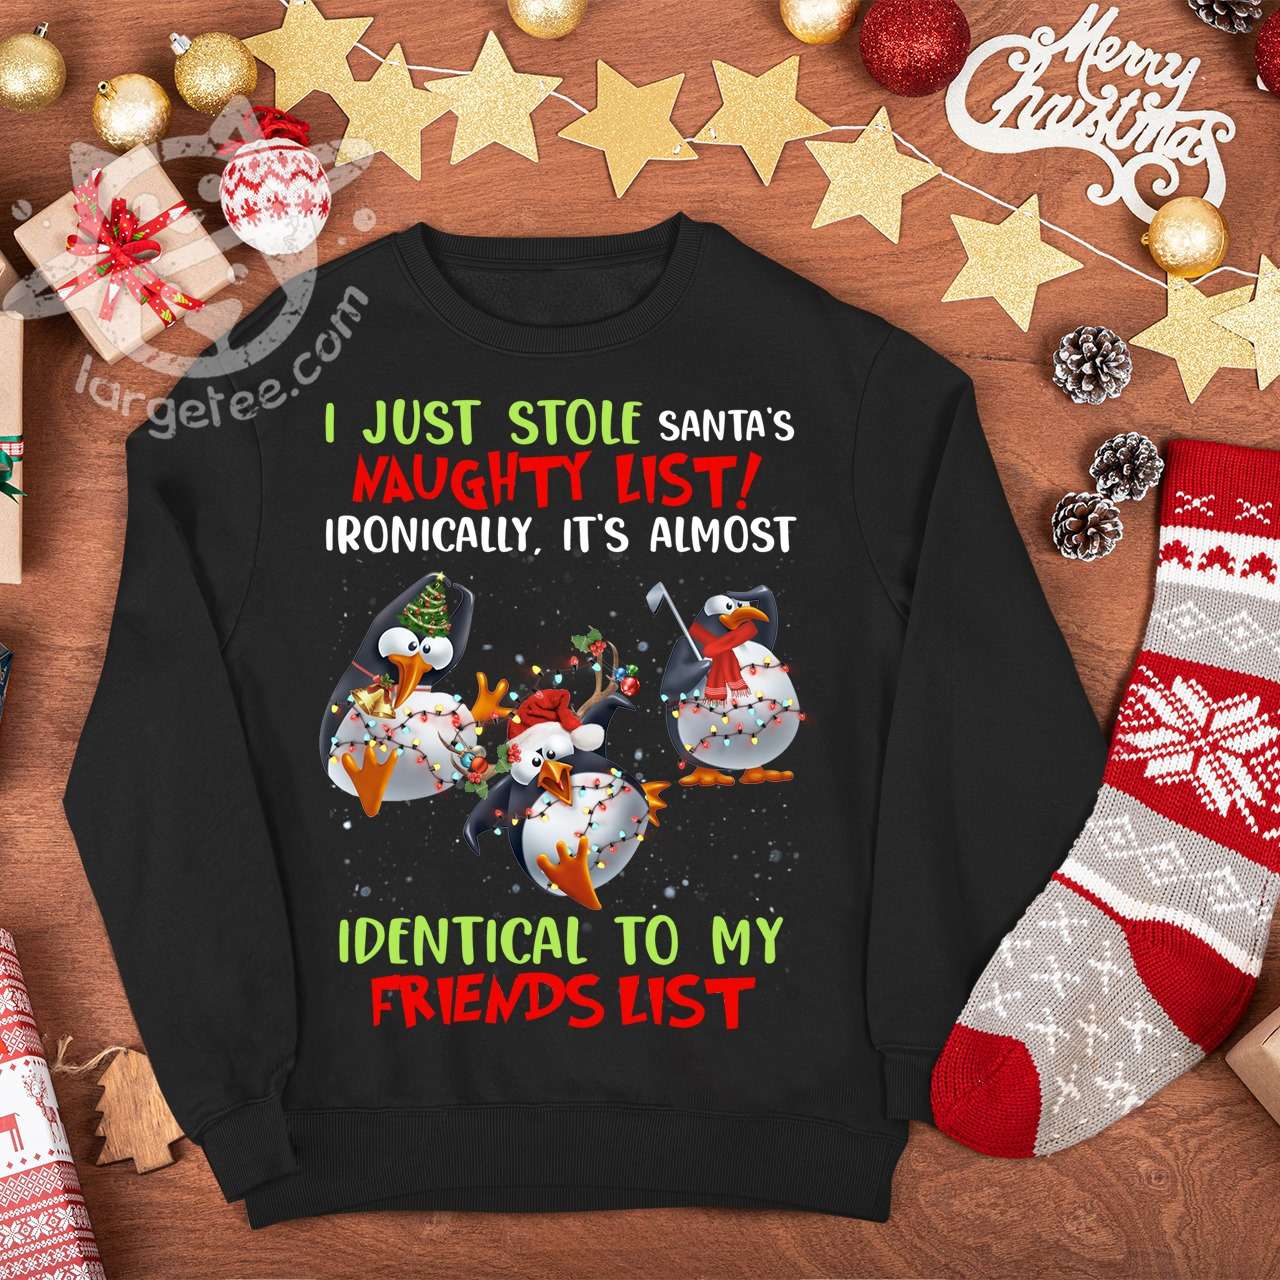 I just stole santa's naughty list - Identical to my friends list, Christmas snowman, Christmas day gift